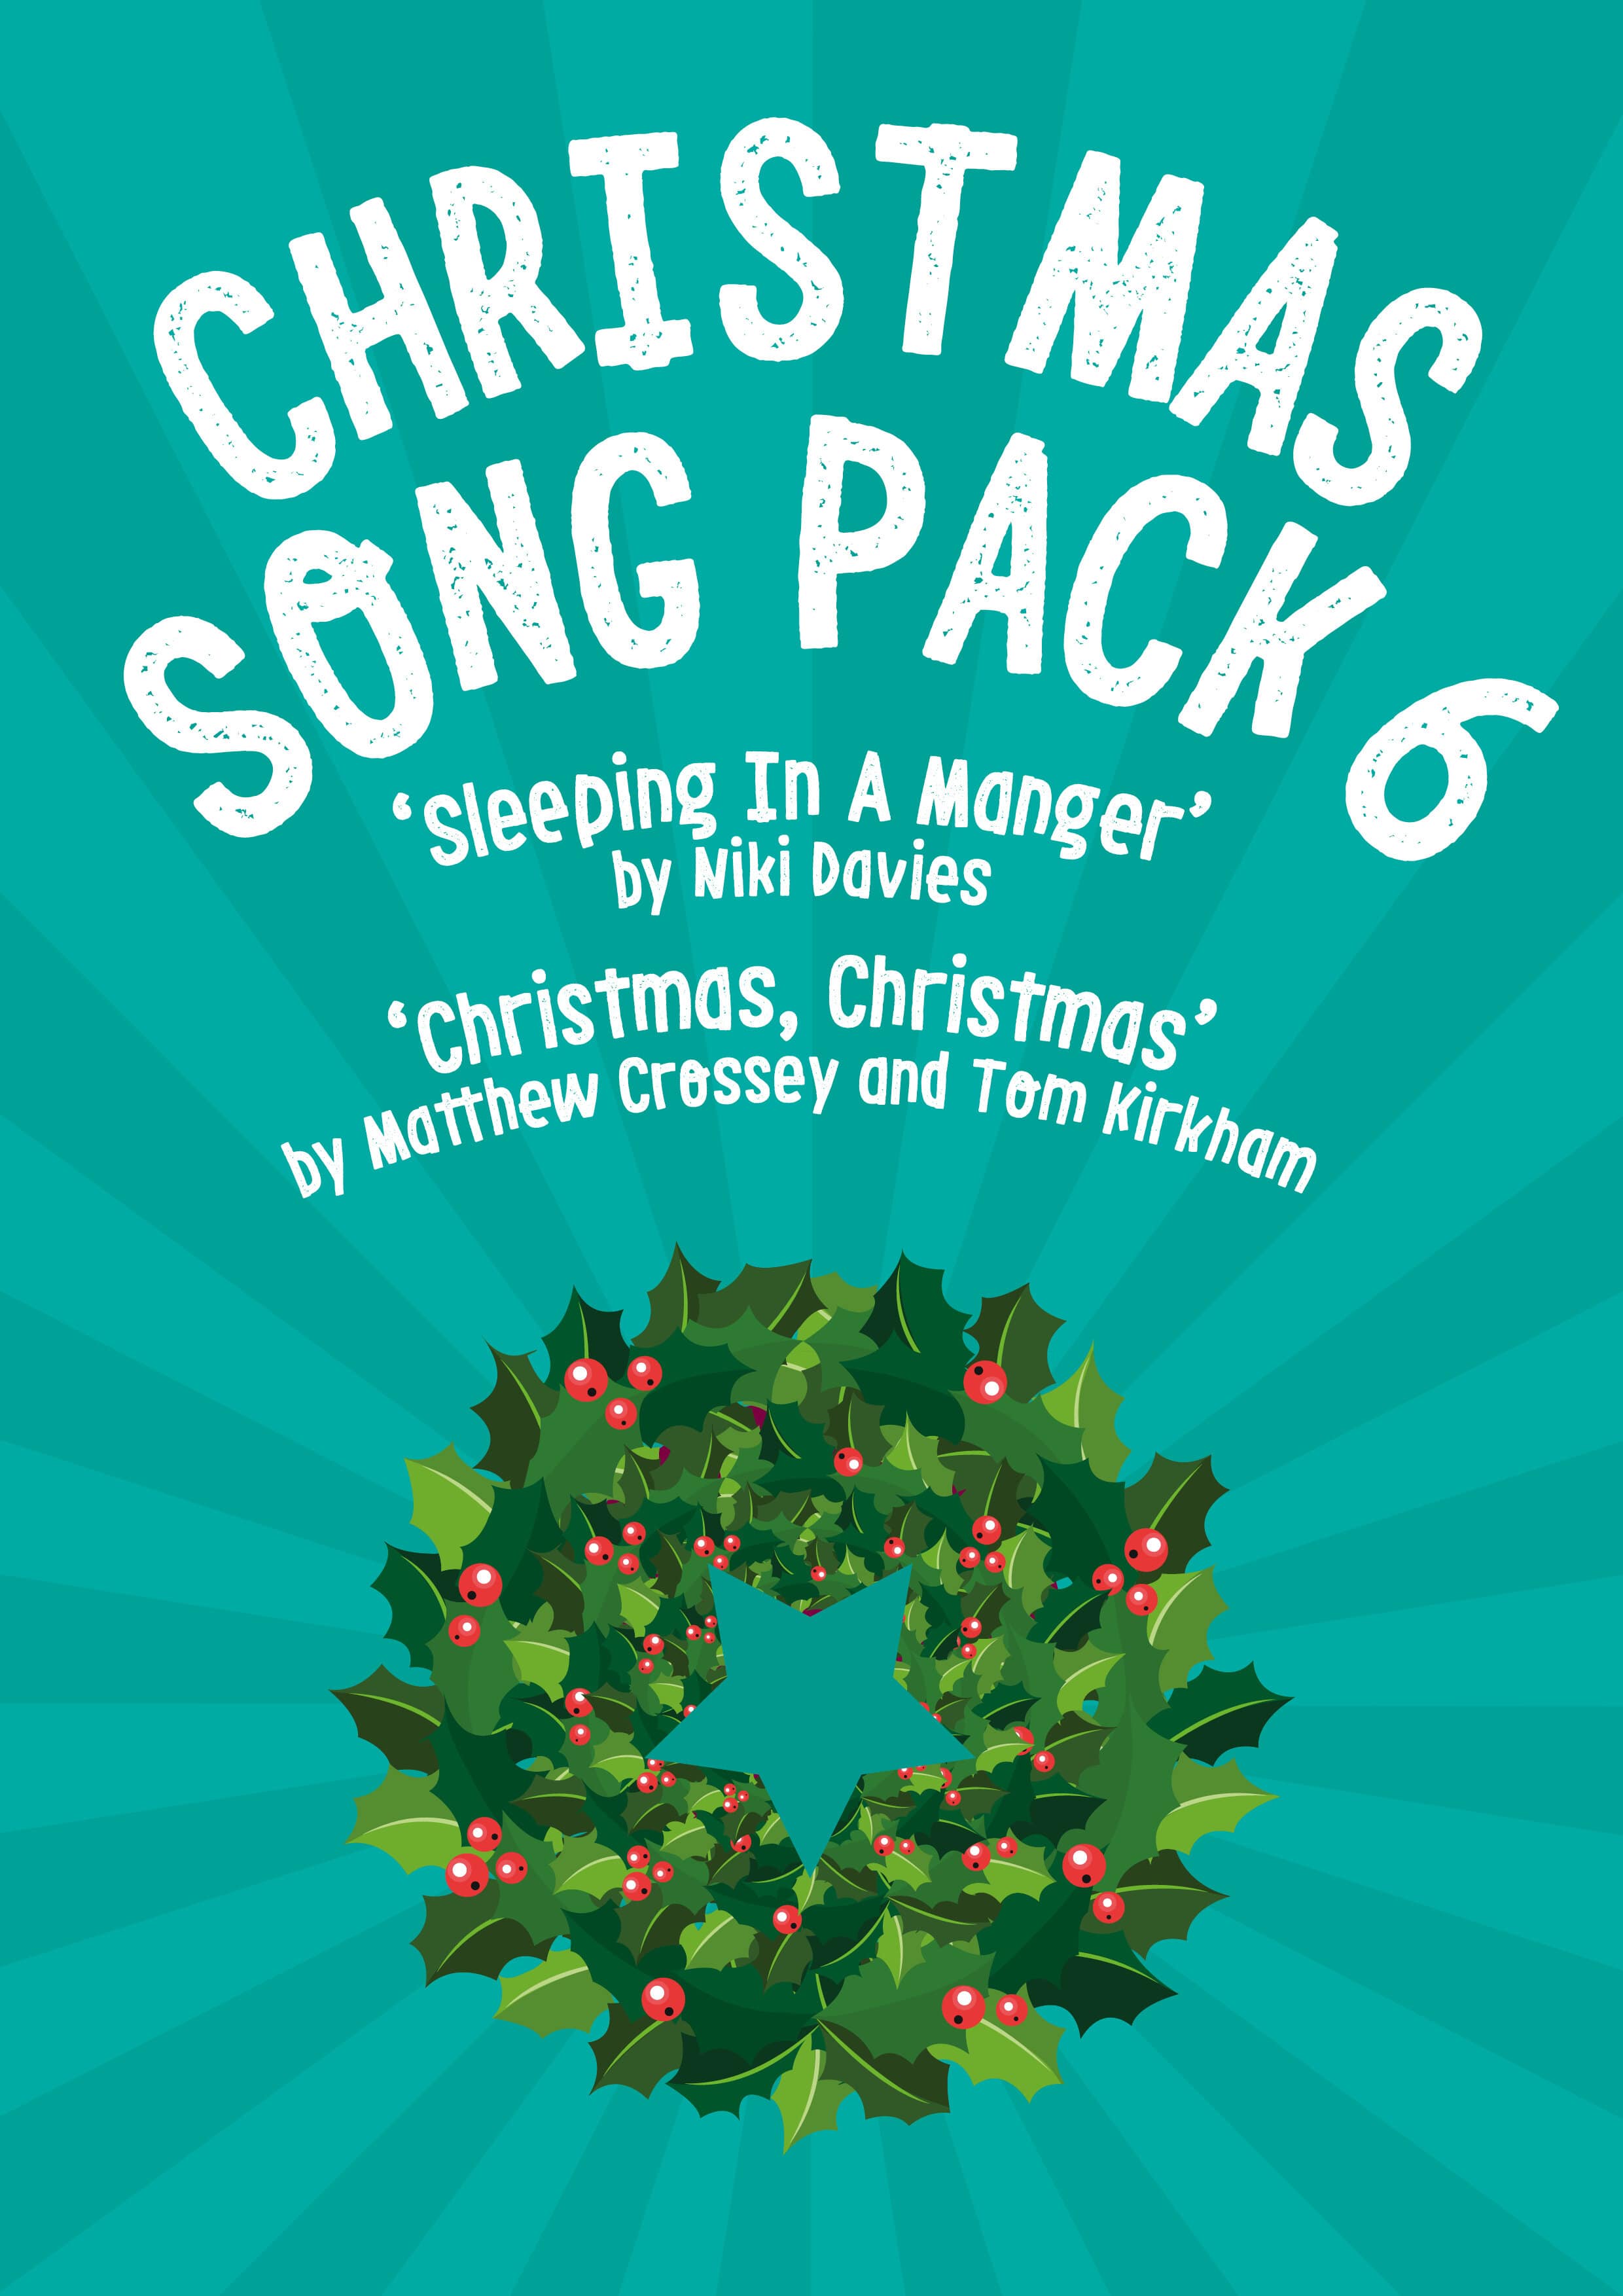 Christmas Songs Download Pack 6 - 100% Discount With Code CHRISTMAS6